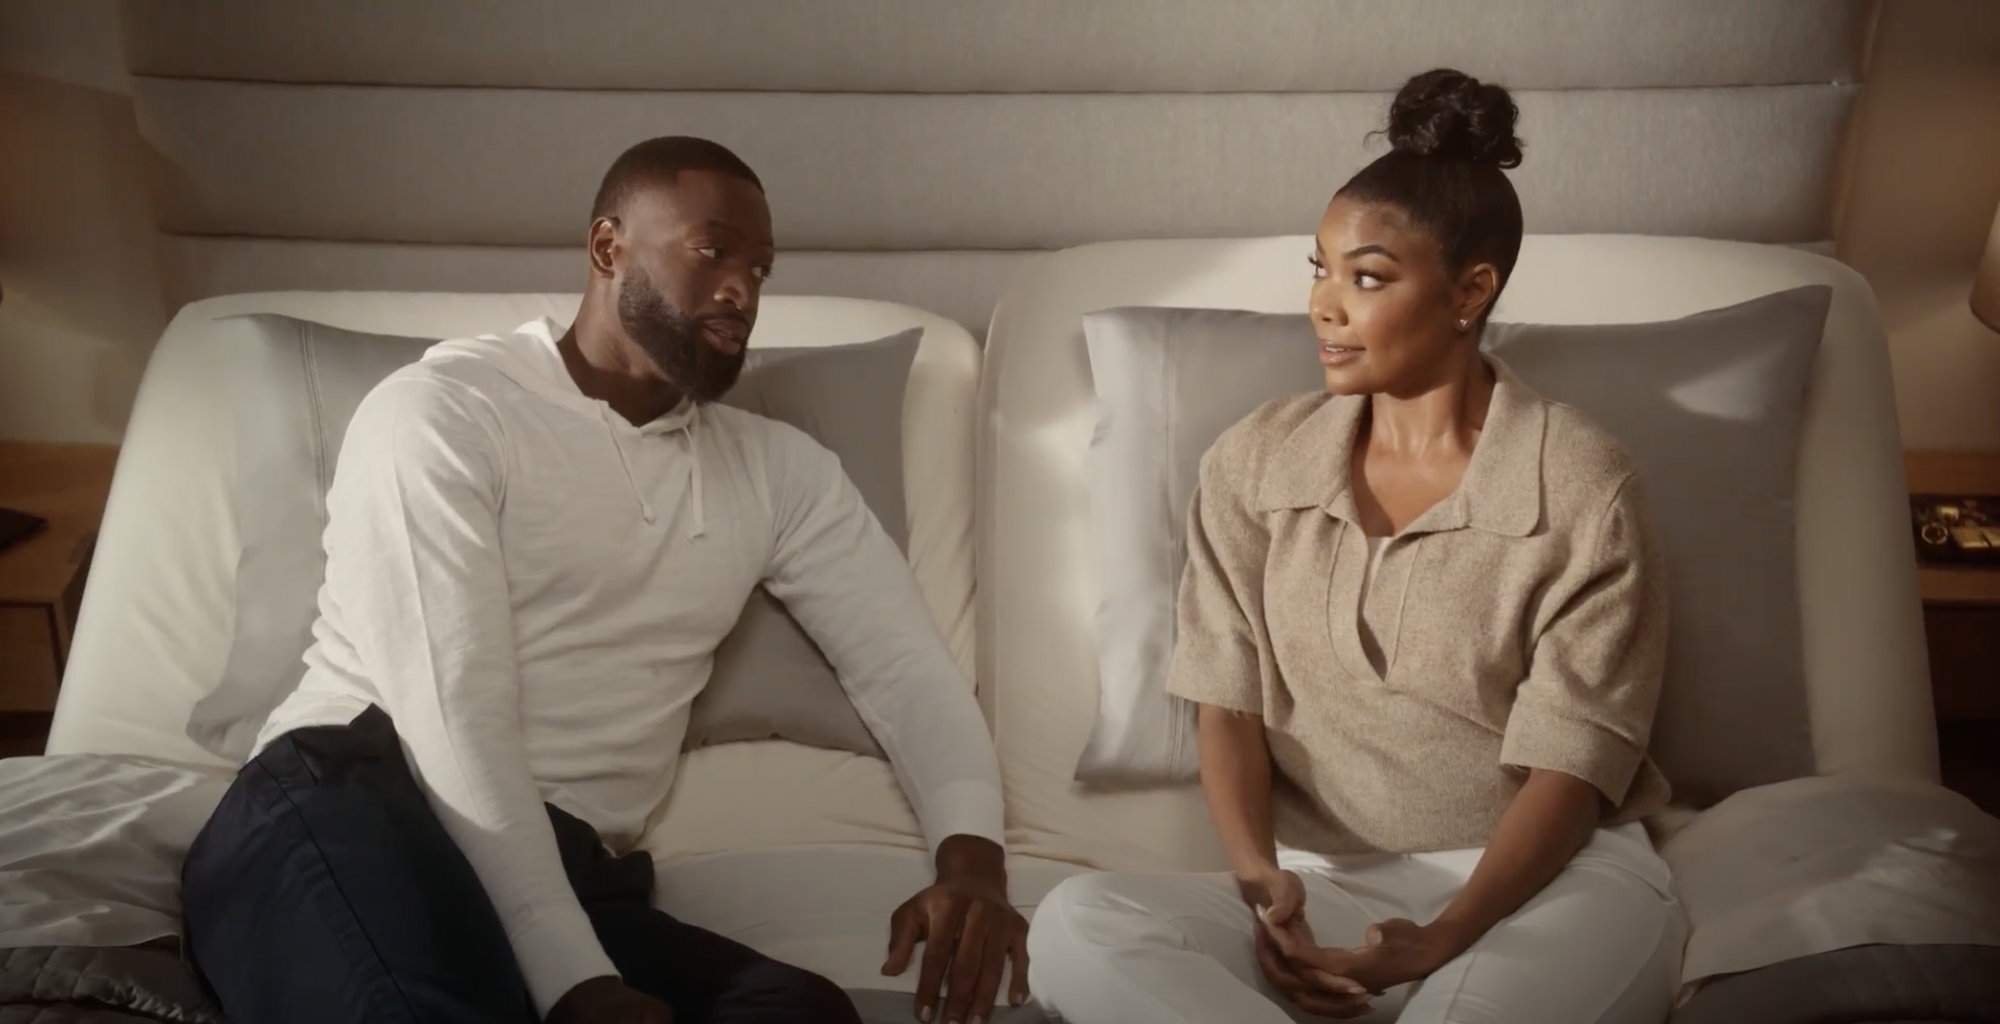 Sleep Number Launches Sleep Next Level Campaign, Starring Gabrielle Union  and Dwyane Wade